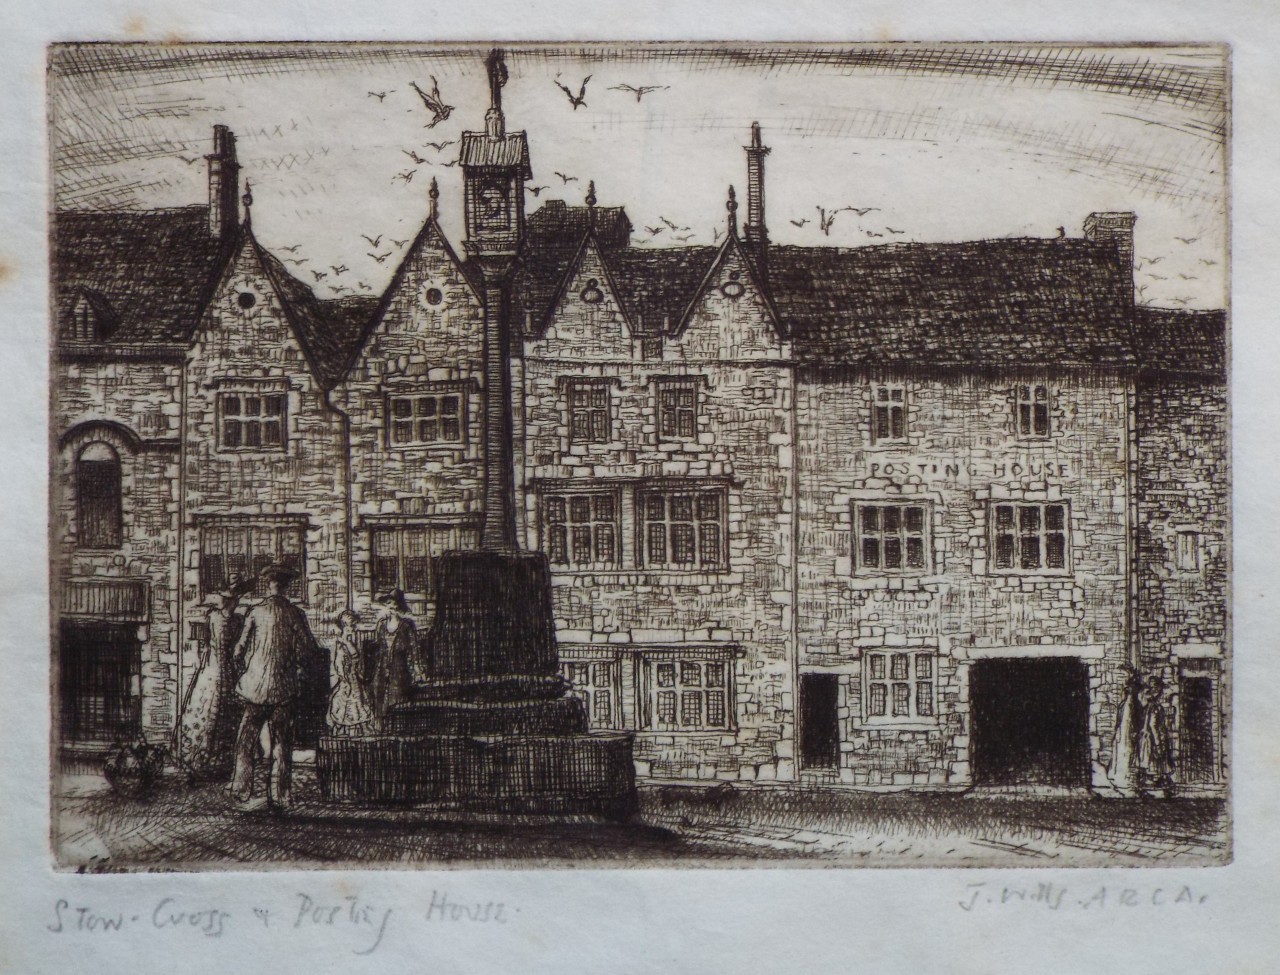 Etching - Stow - Cross & Posting House - Wills